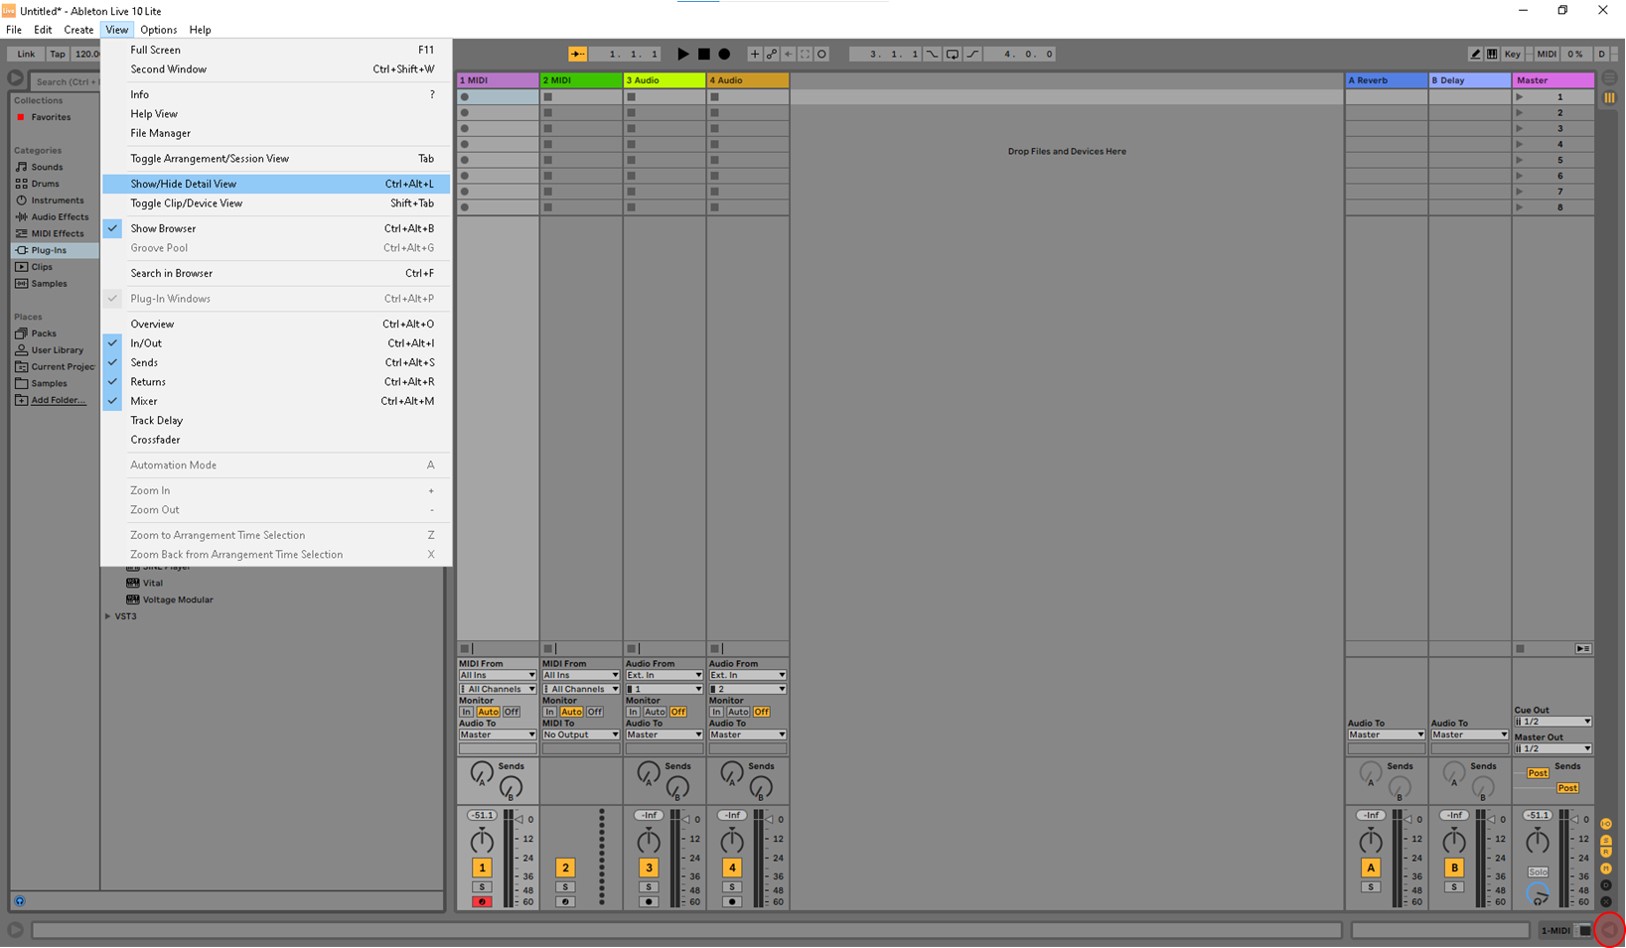 How to open the "Detail View" in Ableton Live